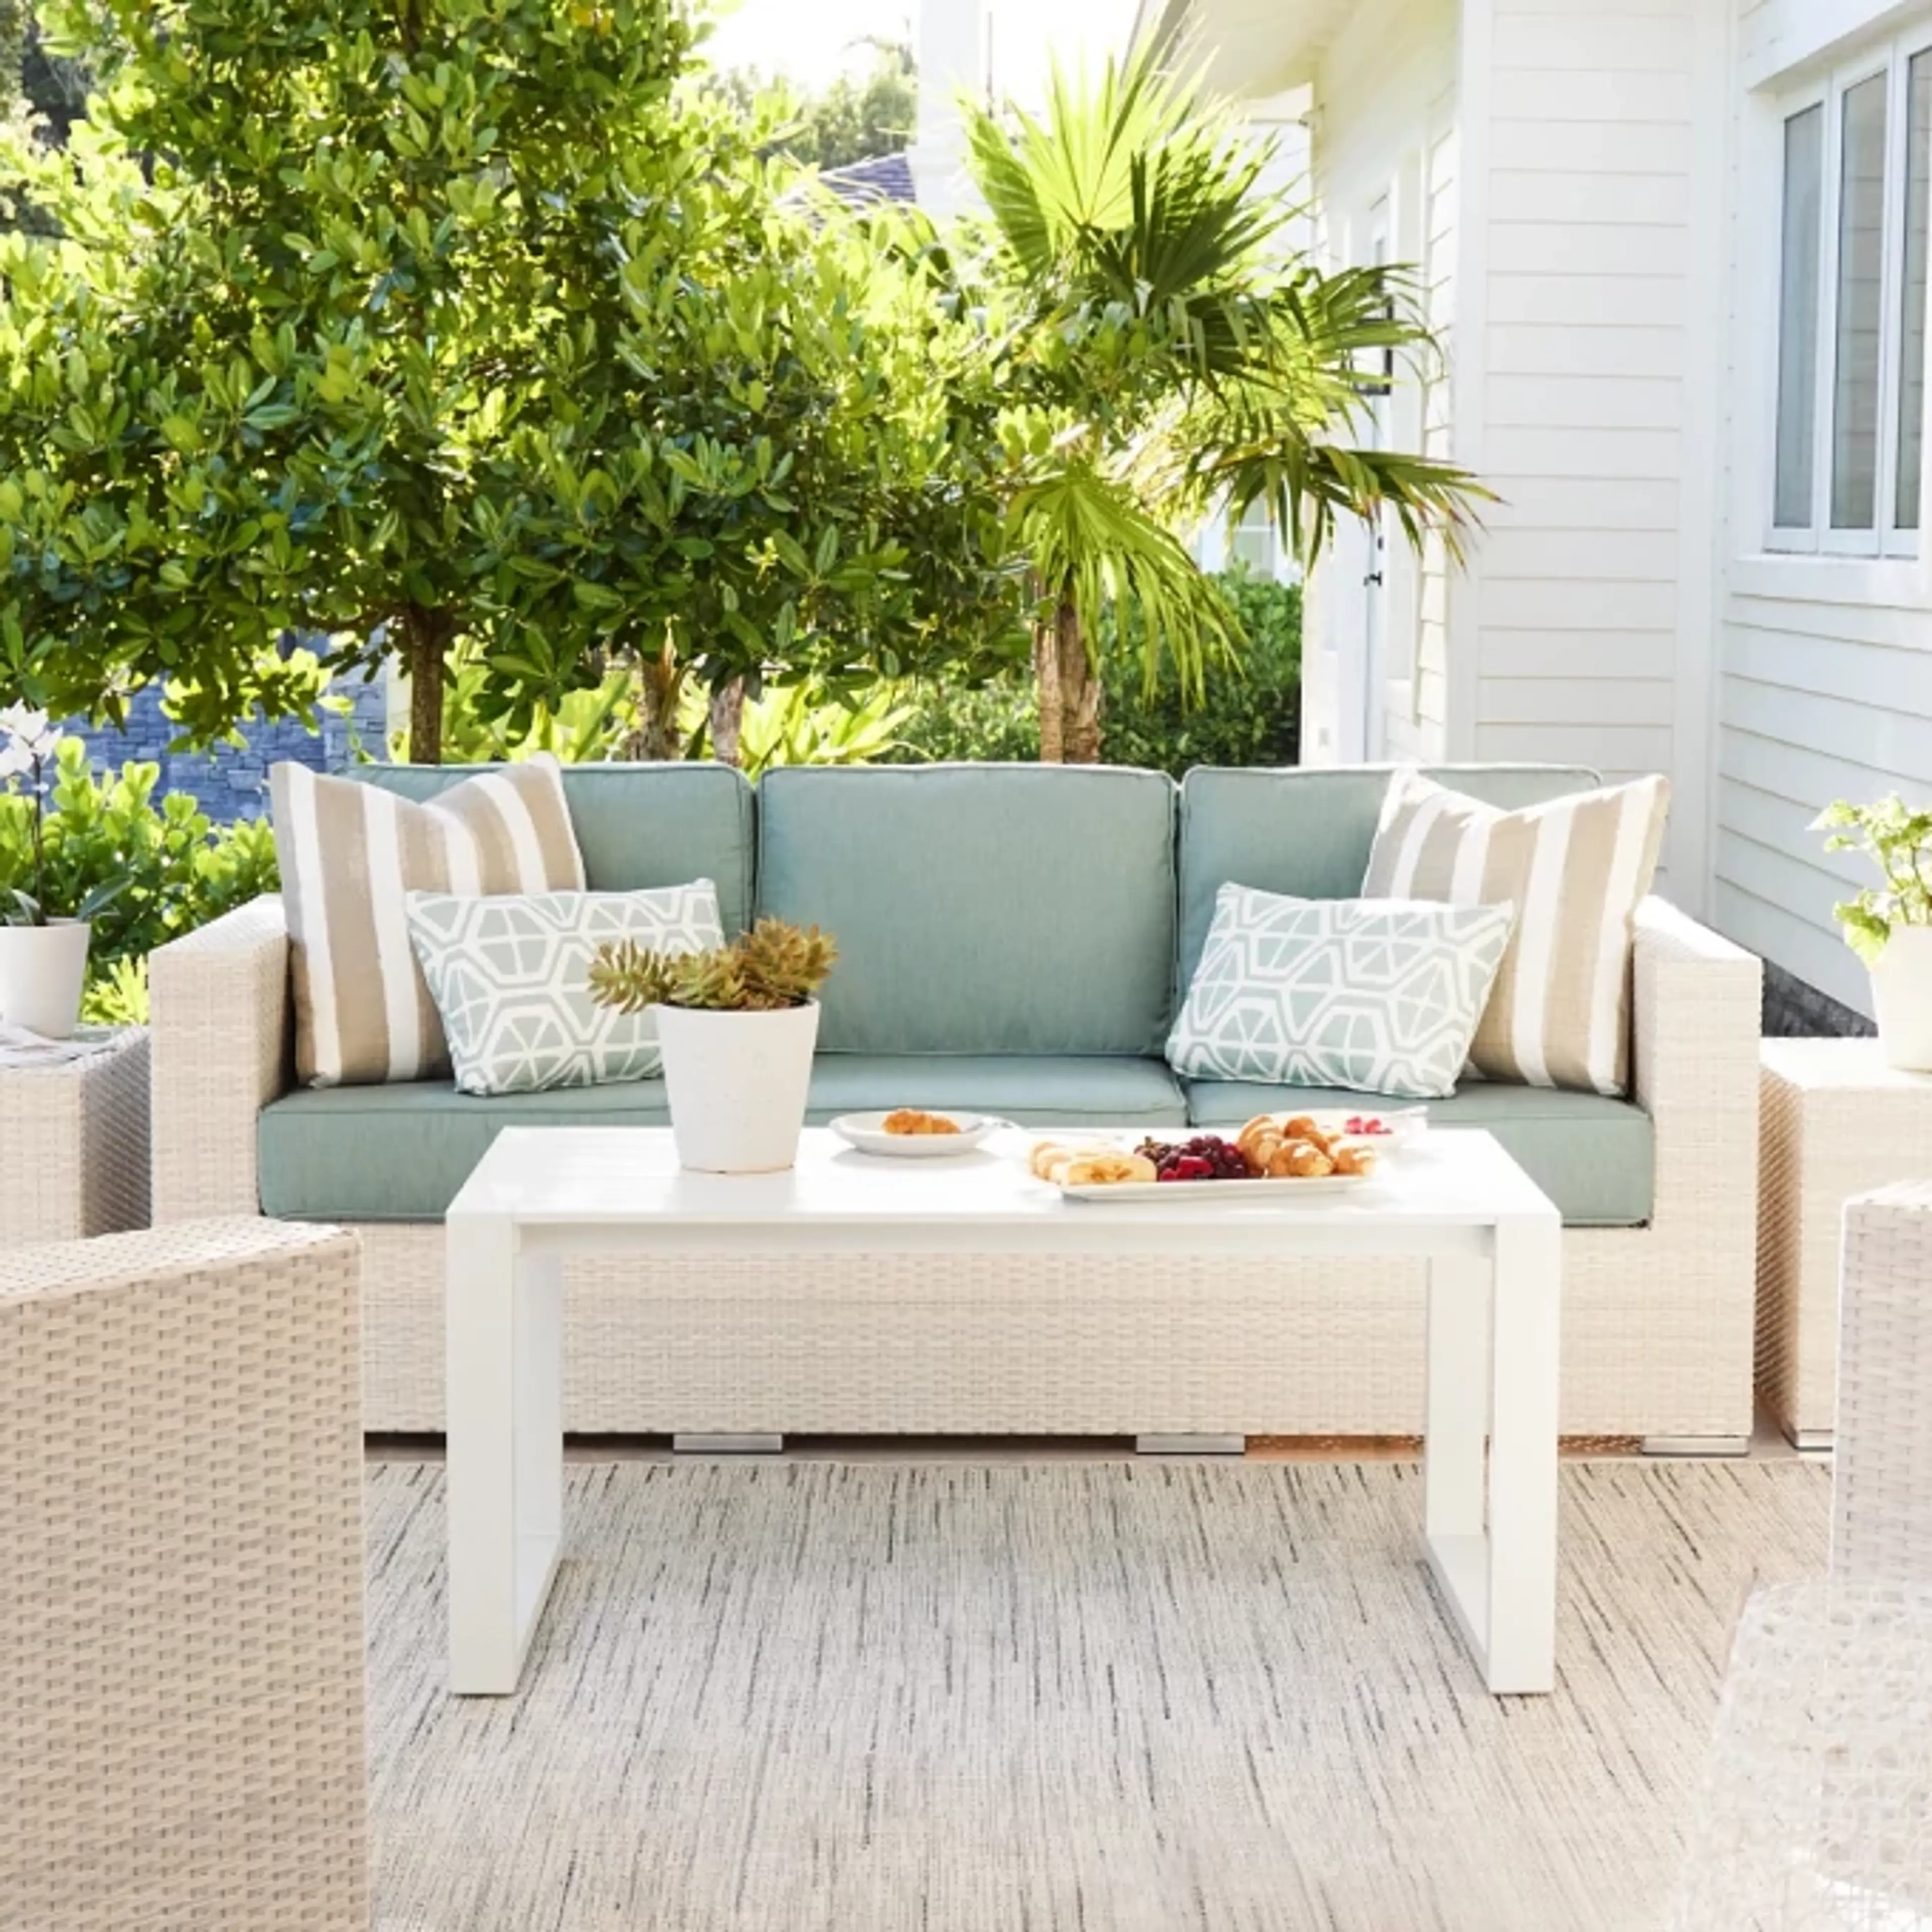 Selecting the Right Mildew-Resistant Patio Furniture